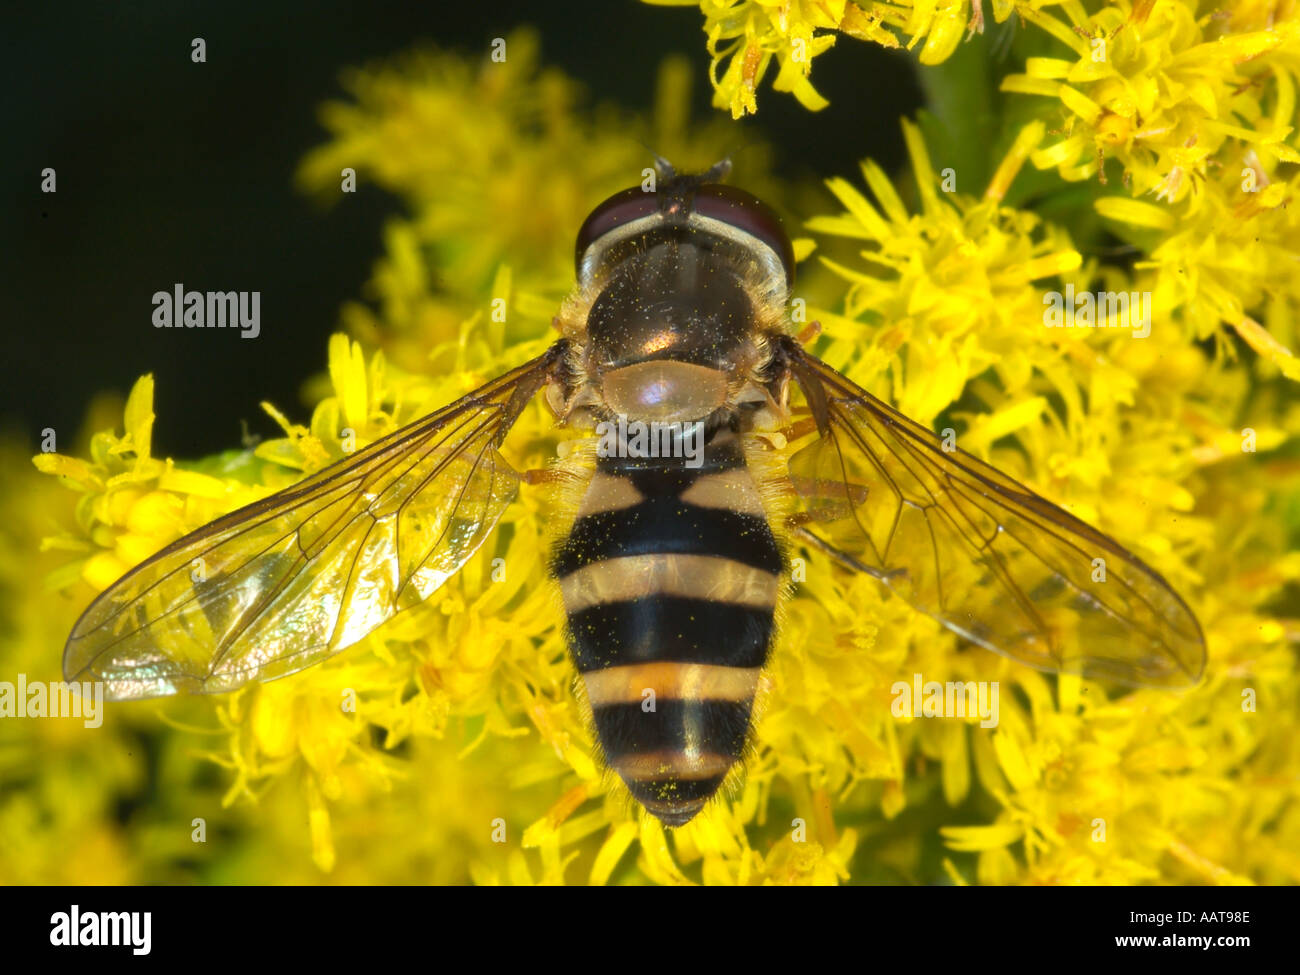 syrphid fly flower fly syrphid diptera wasp mimic Stock Photo